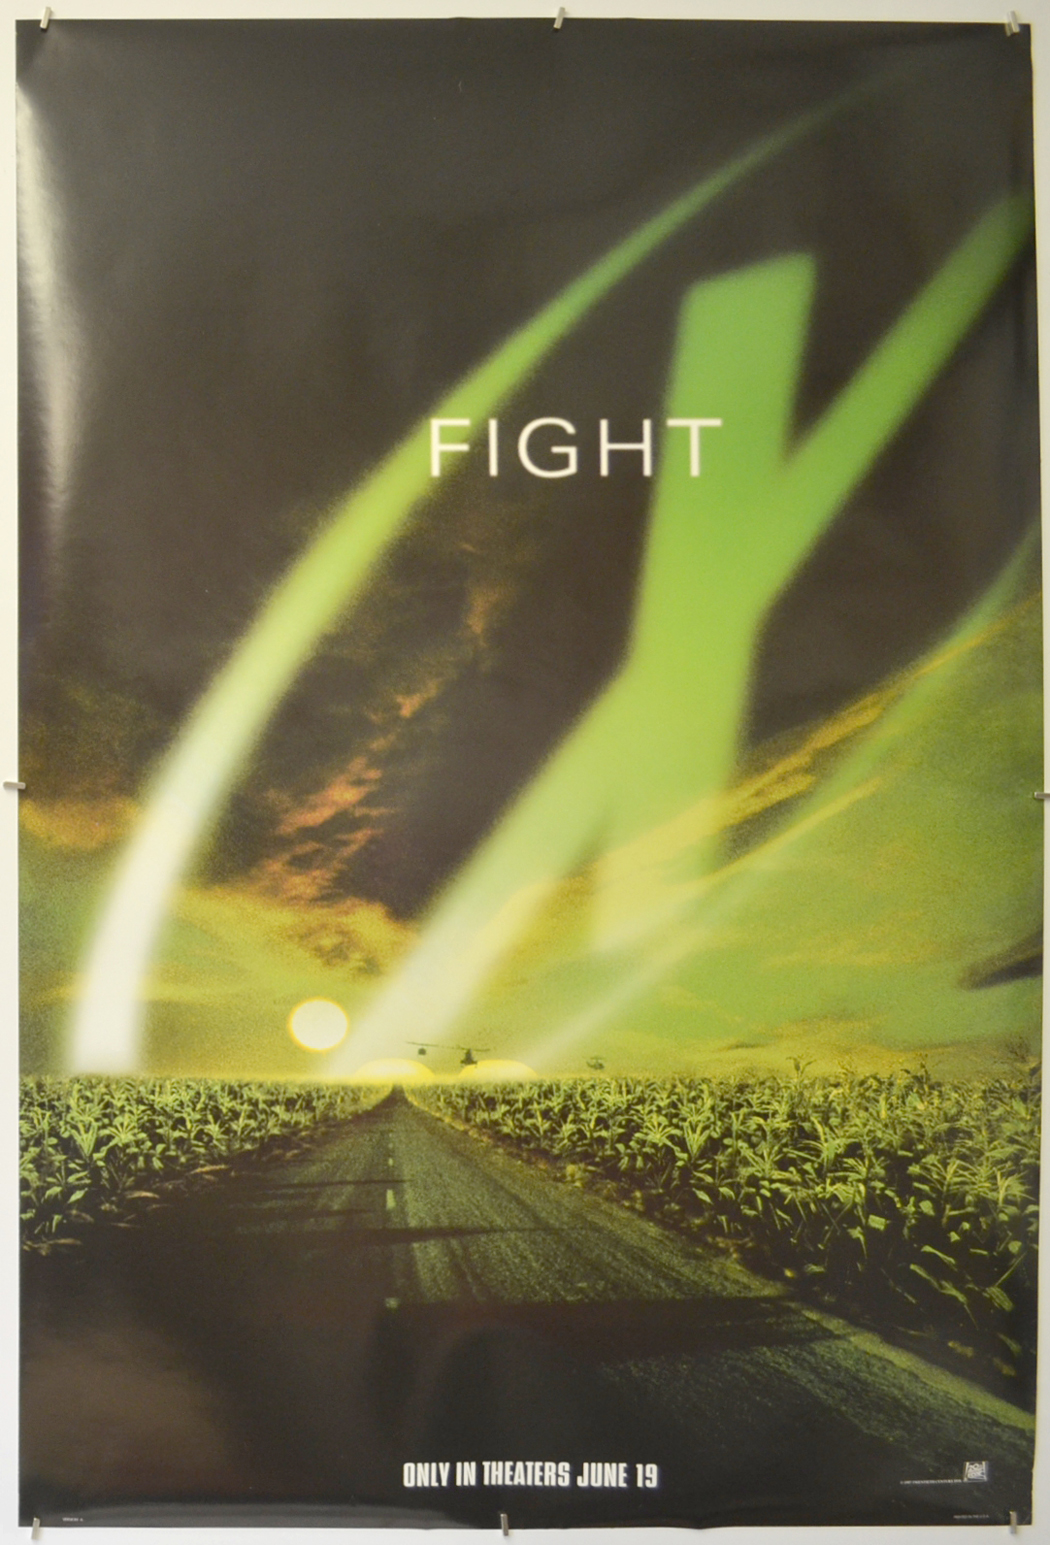 FIGHT THE FUTURE #3469   RP57 M FREE SHIP POSTER : MOVIE REPRO : X-FILES 